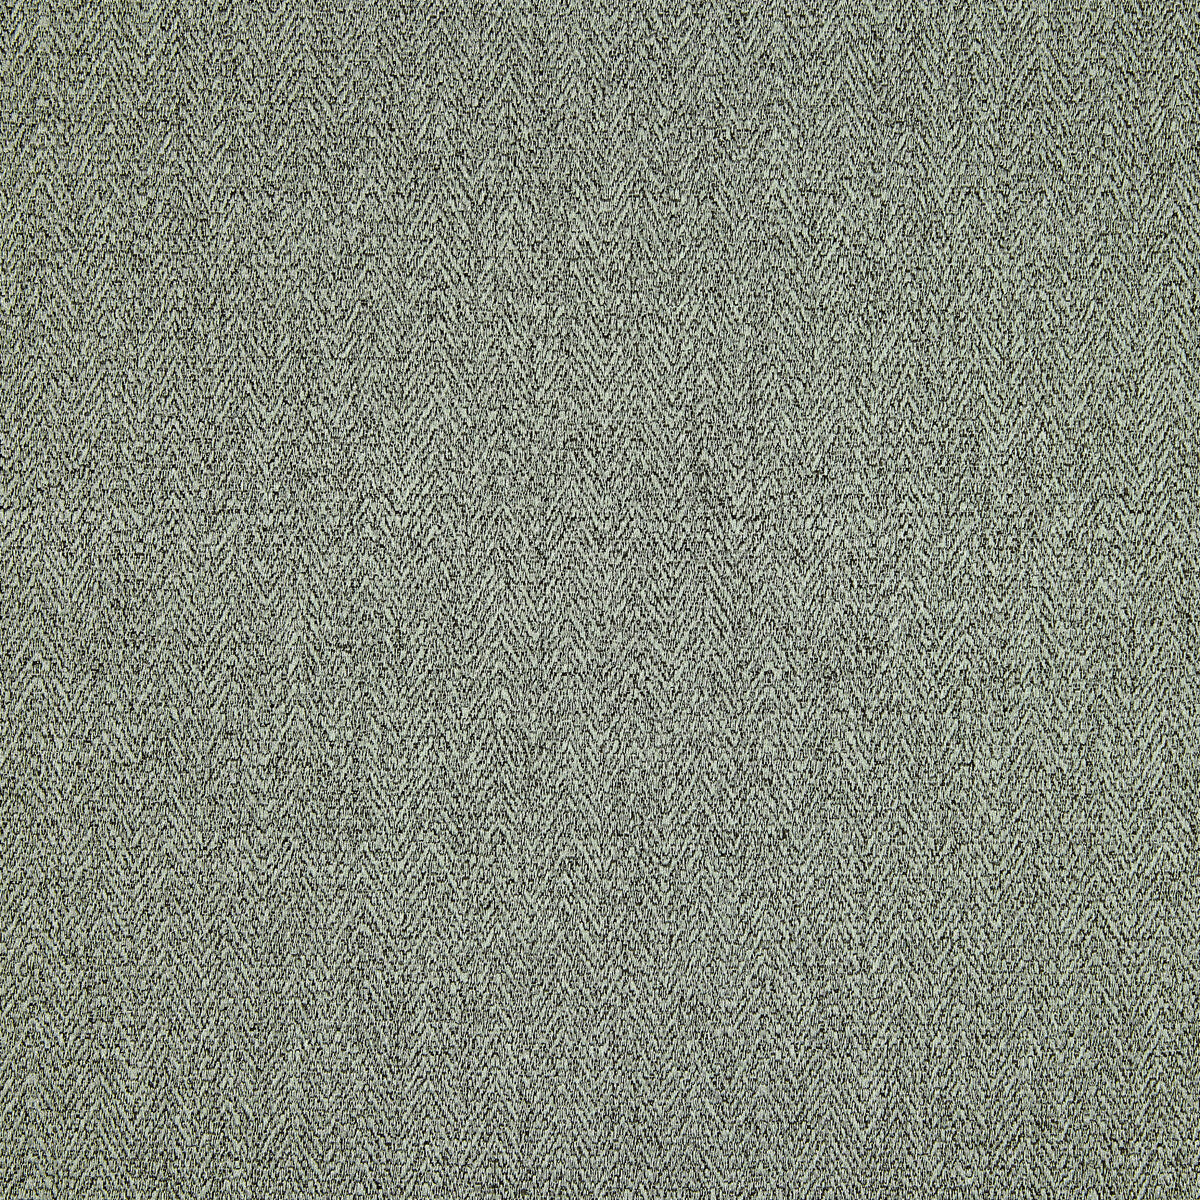 Brummell fabric in 3 color - pattern LZ-30363.03.0 - by Kravet Design in the Lizzo collection